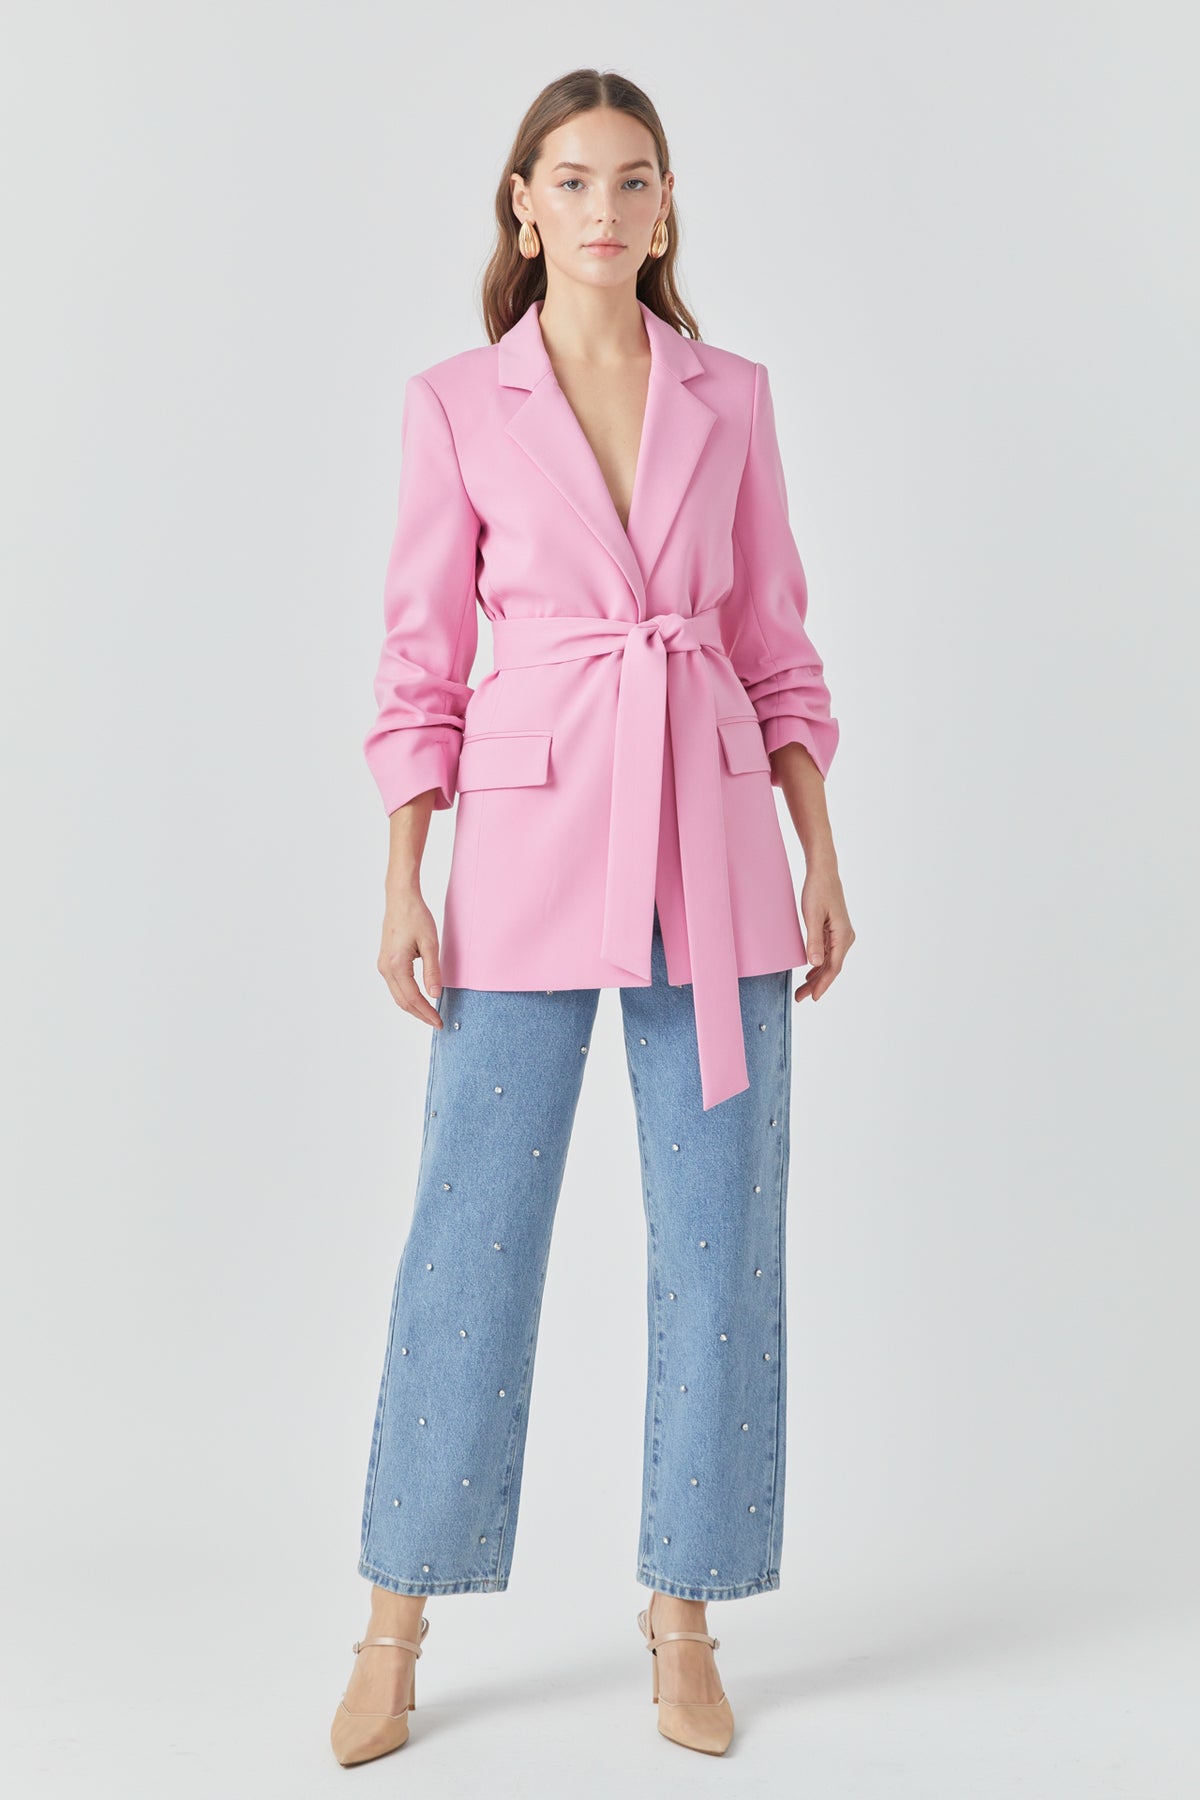 ENDLESS ROSE - Sleeve Cinched 3/4 Blazer - BLAZERS available at Objectrare